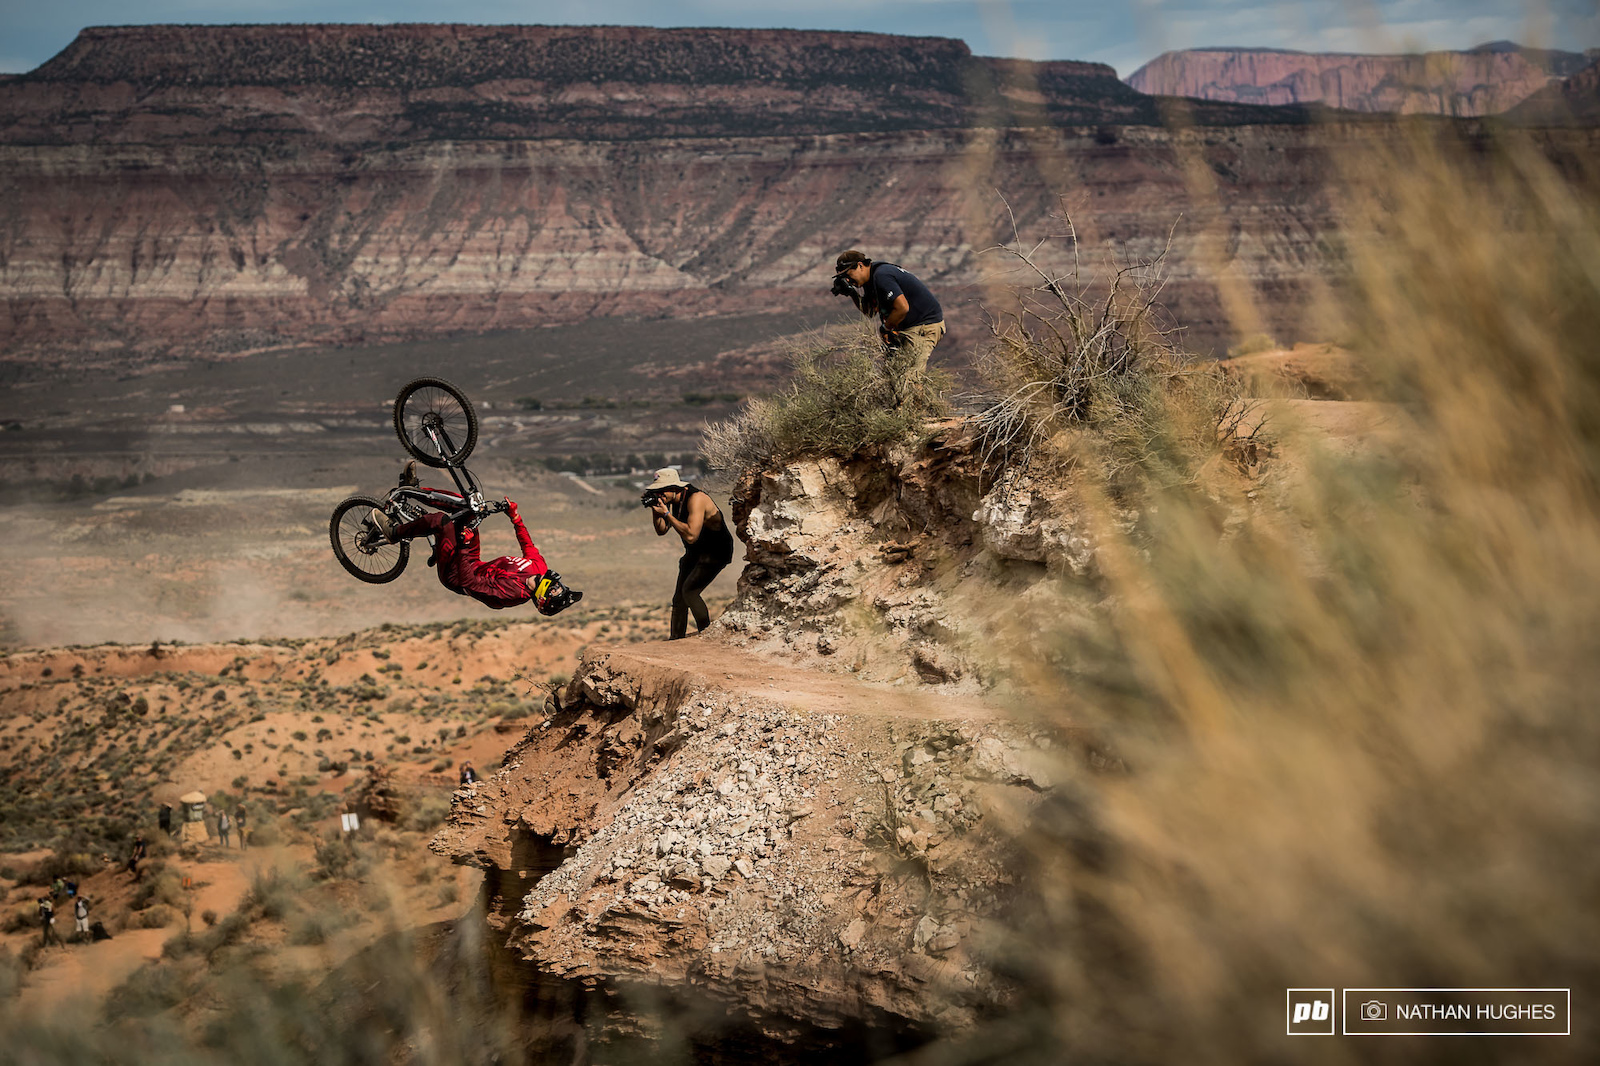 Flat drop flips for the win...  Brandon Semenuk continues to show the world the true potential of mountainbiking.